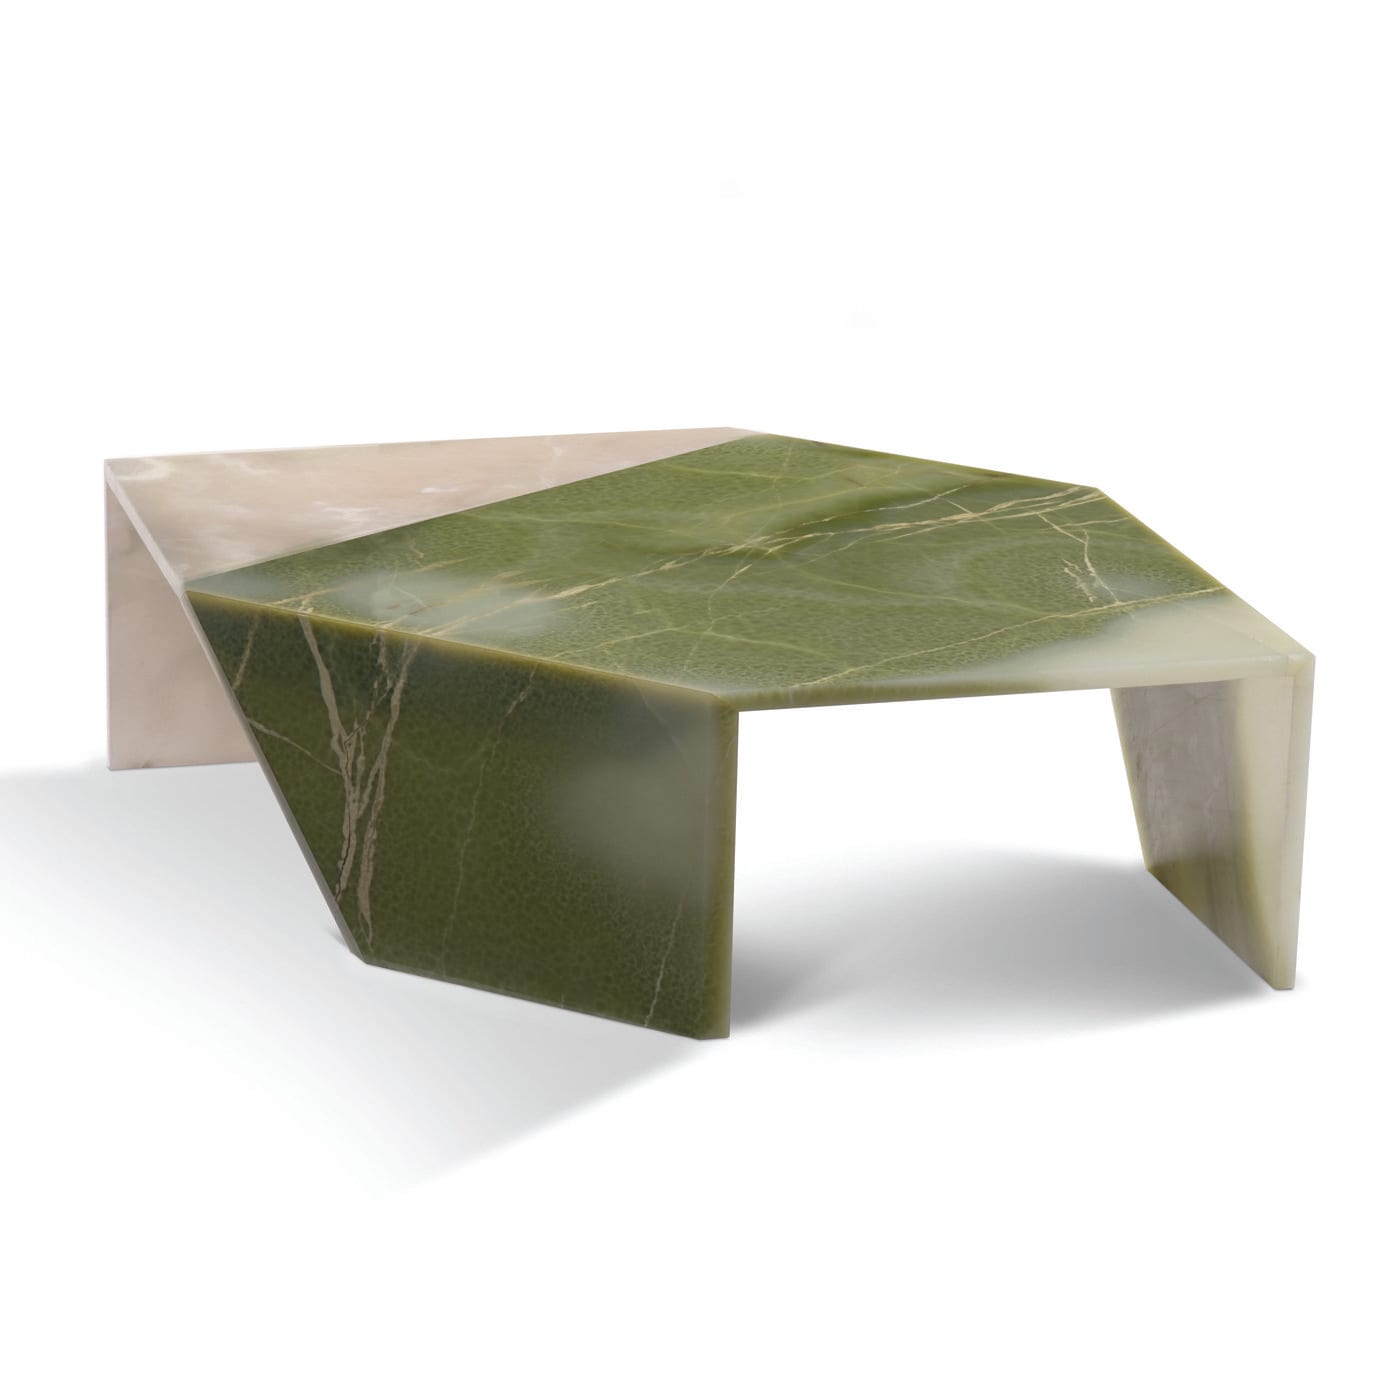 Green and White Origami Table by Patricia Urquiola - Budri